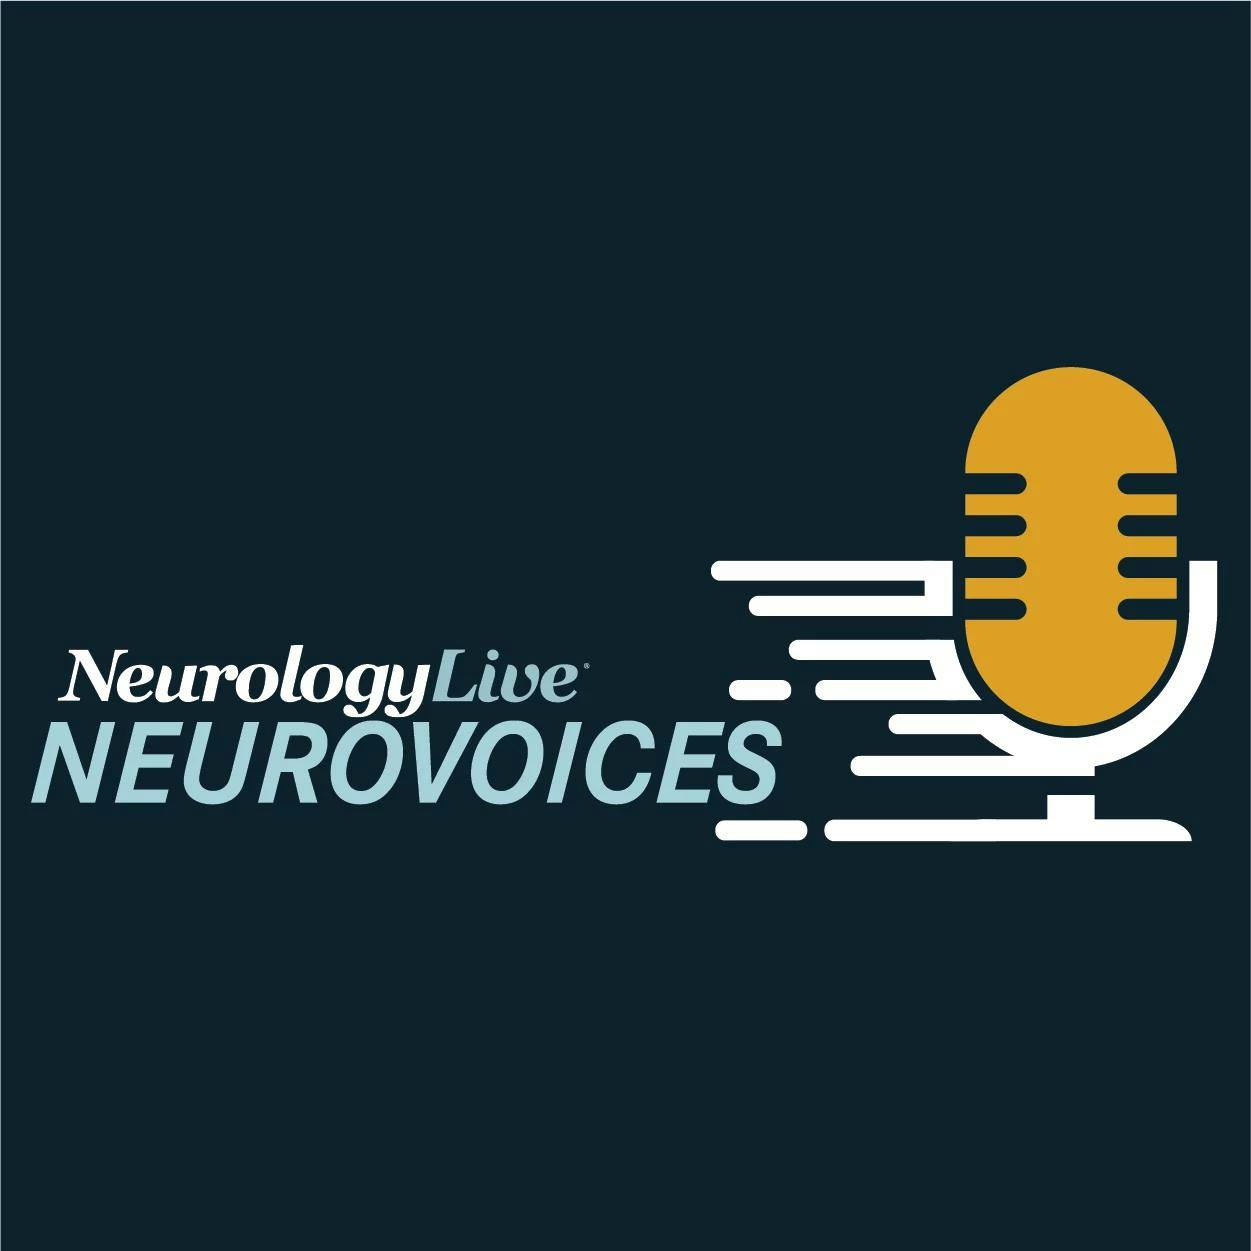 NeuroVoices: Lynn Bekris, PhD, on Future Research for sTREM2, GFAP, and Immunotherapies in Alzheimer Disease